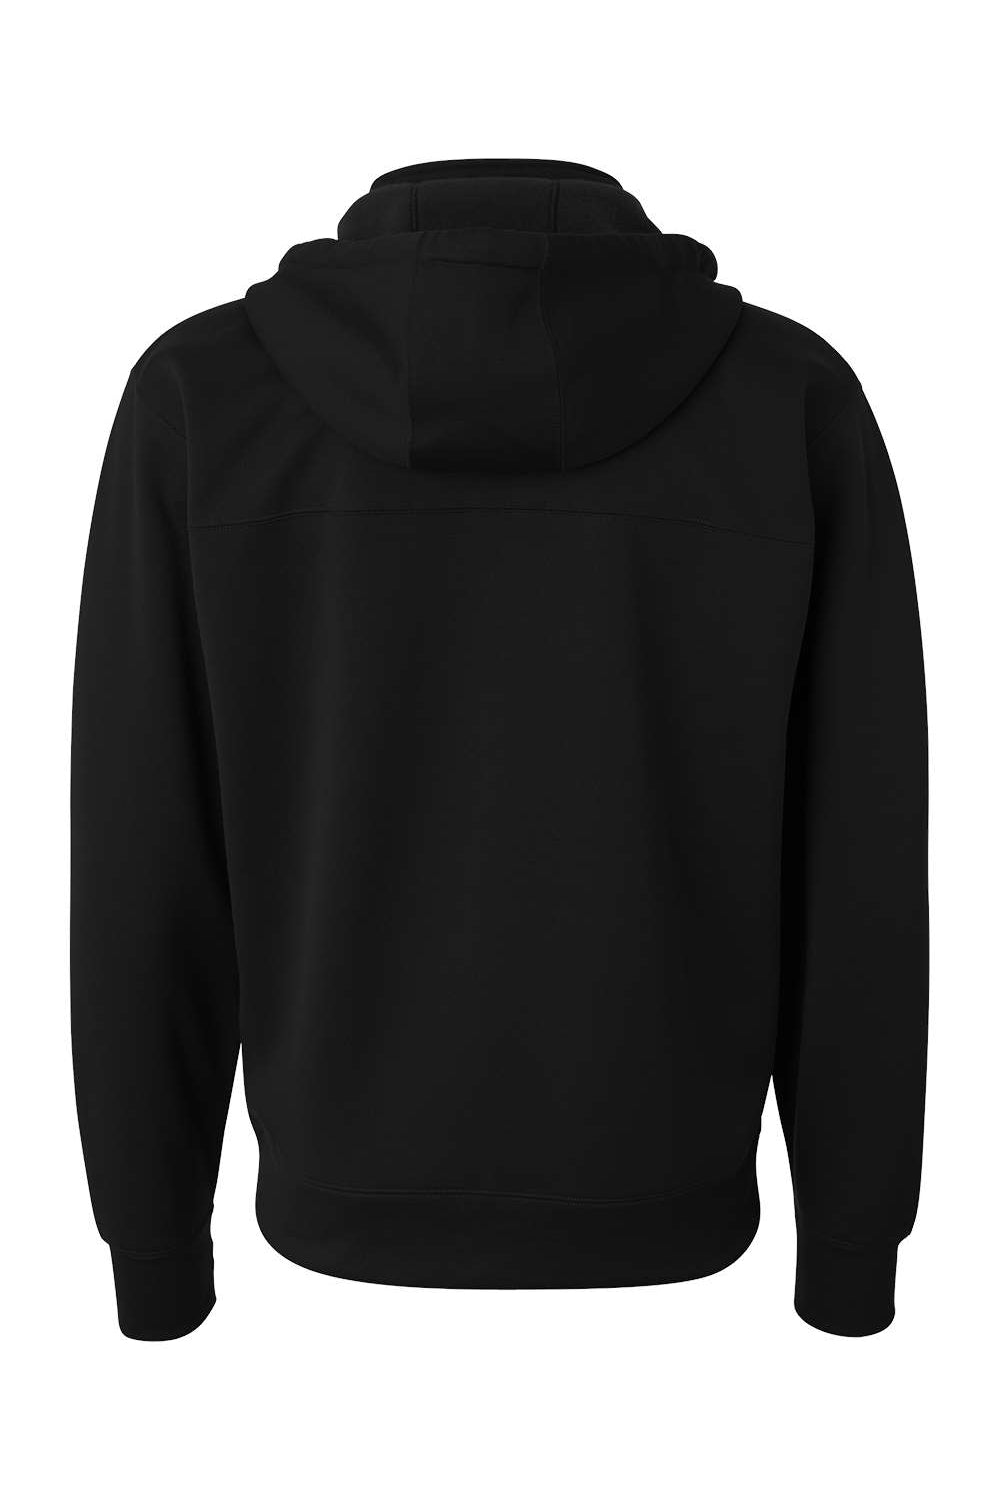 Independent Trading Co. EXP80PTZ Mens Poly Tech Full Zip Hooded Sweatshirt Hoodie Black Flat Back